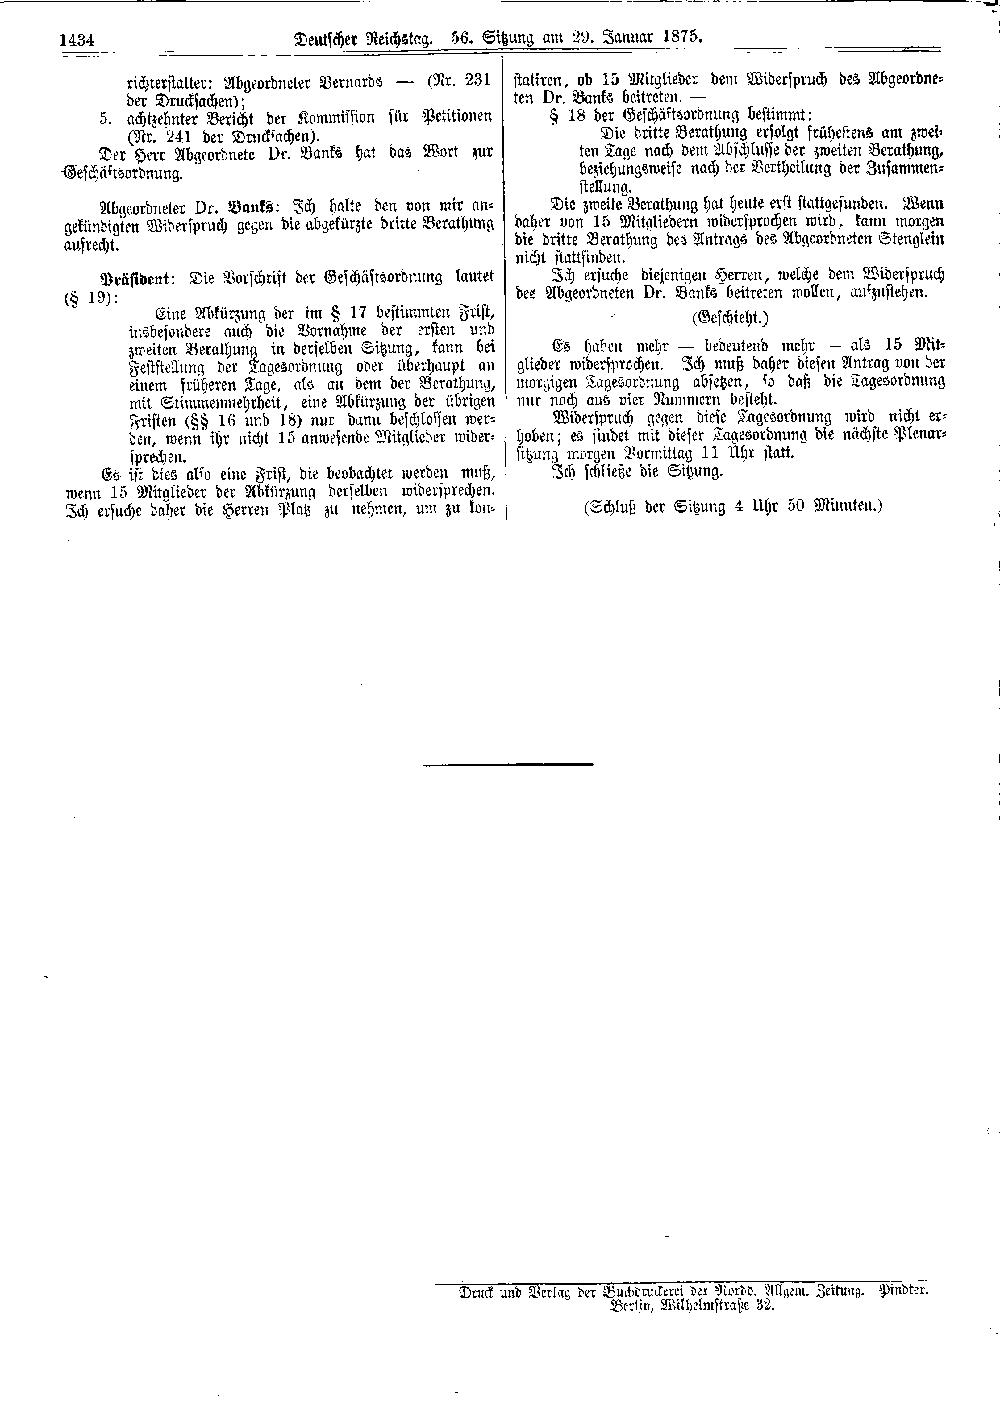 Scan of page 1434